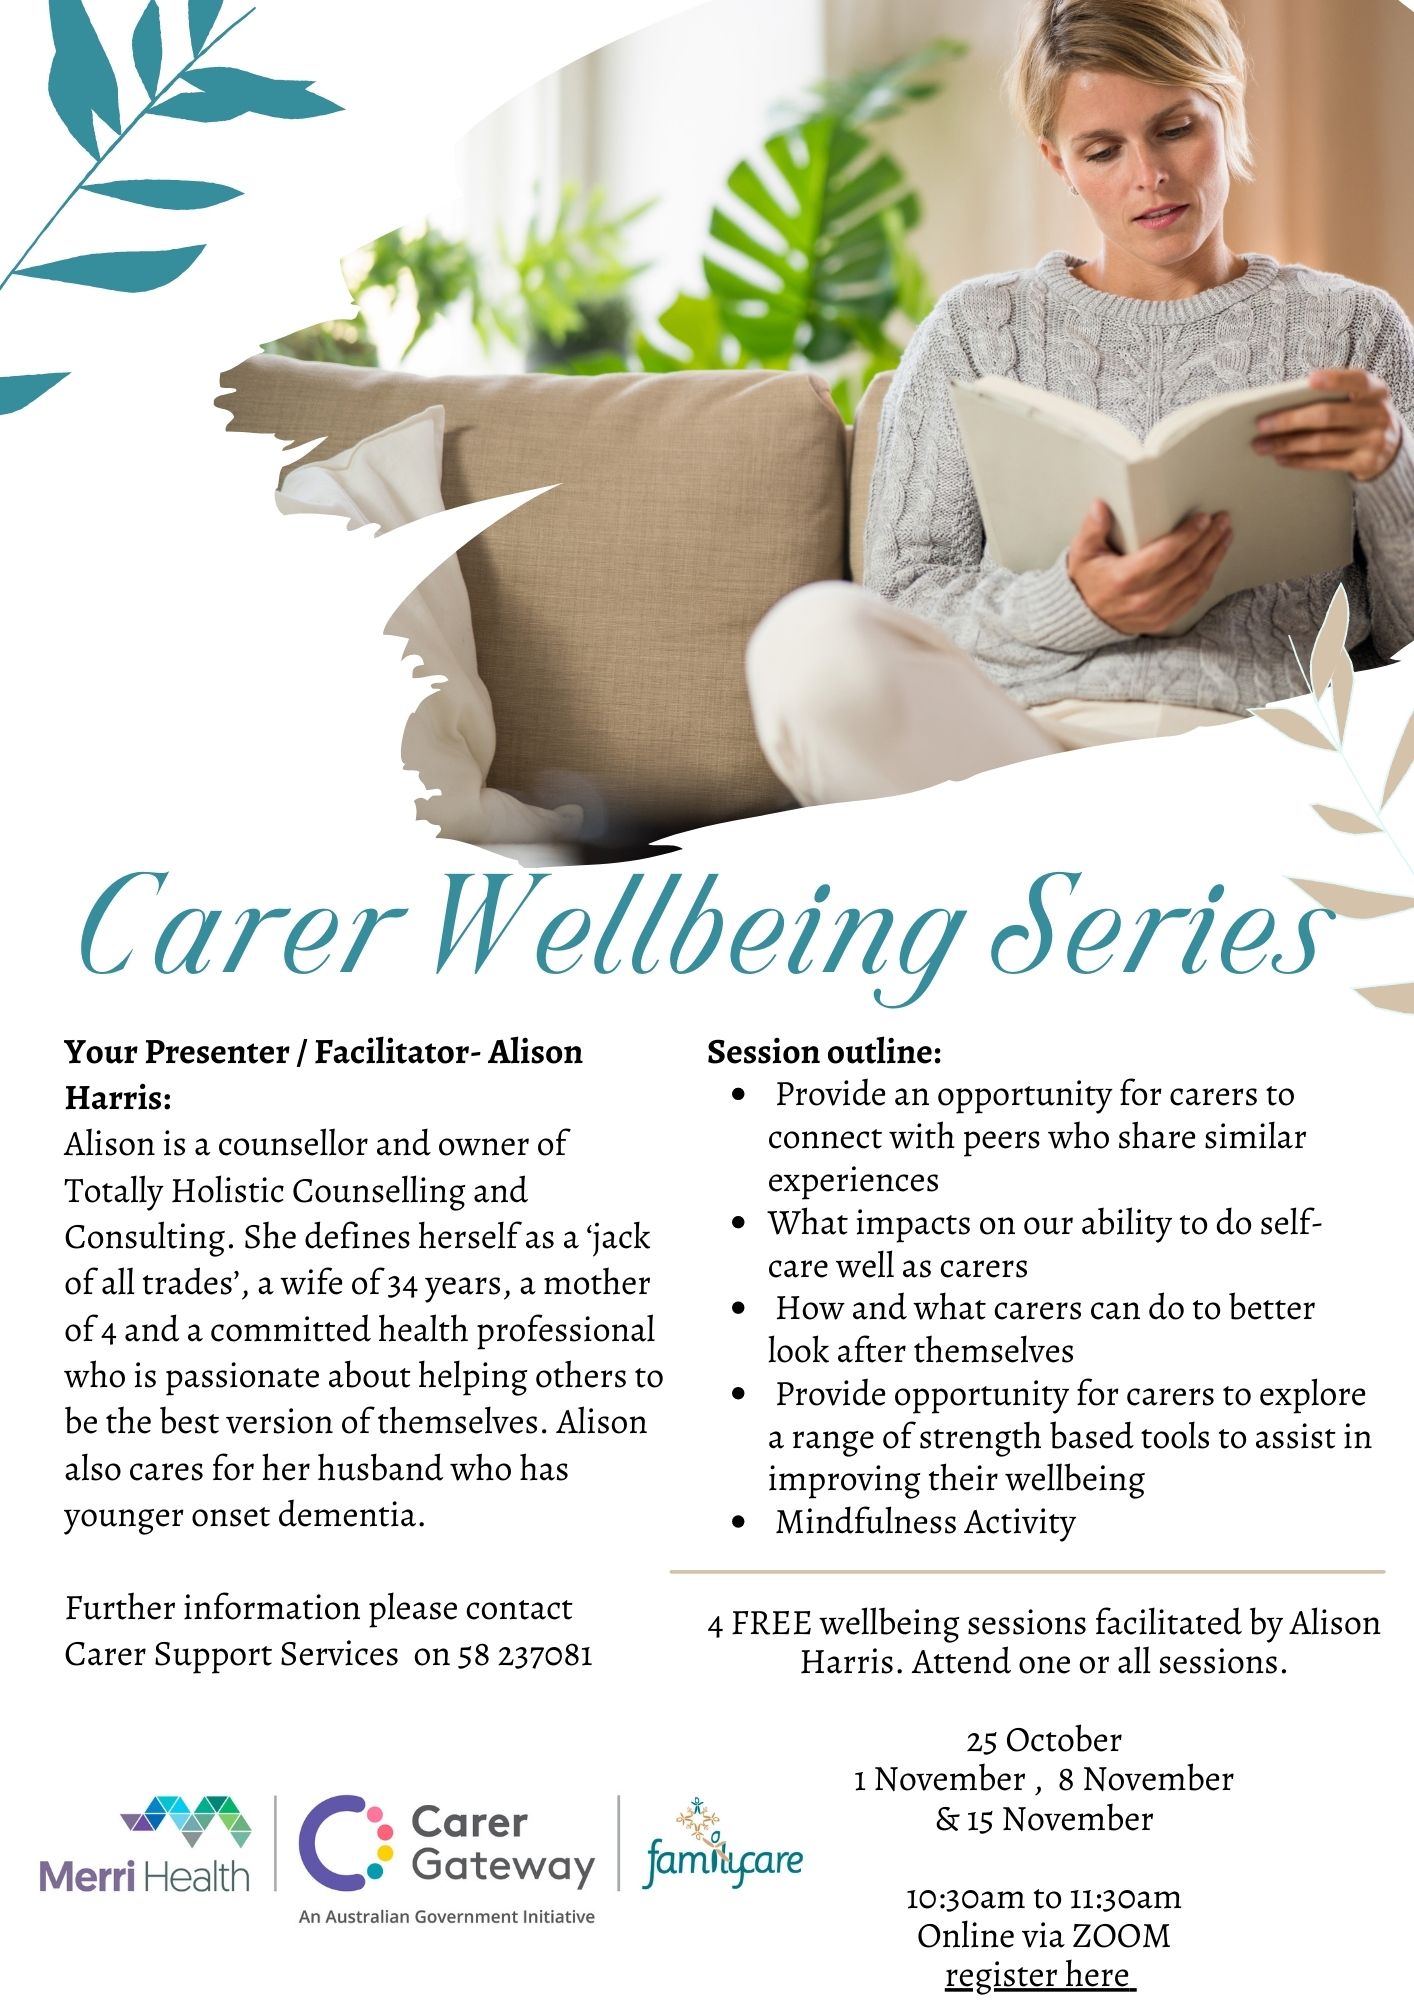 Carer Wellbeing Series flyer